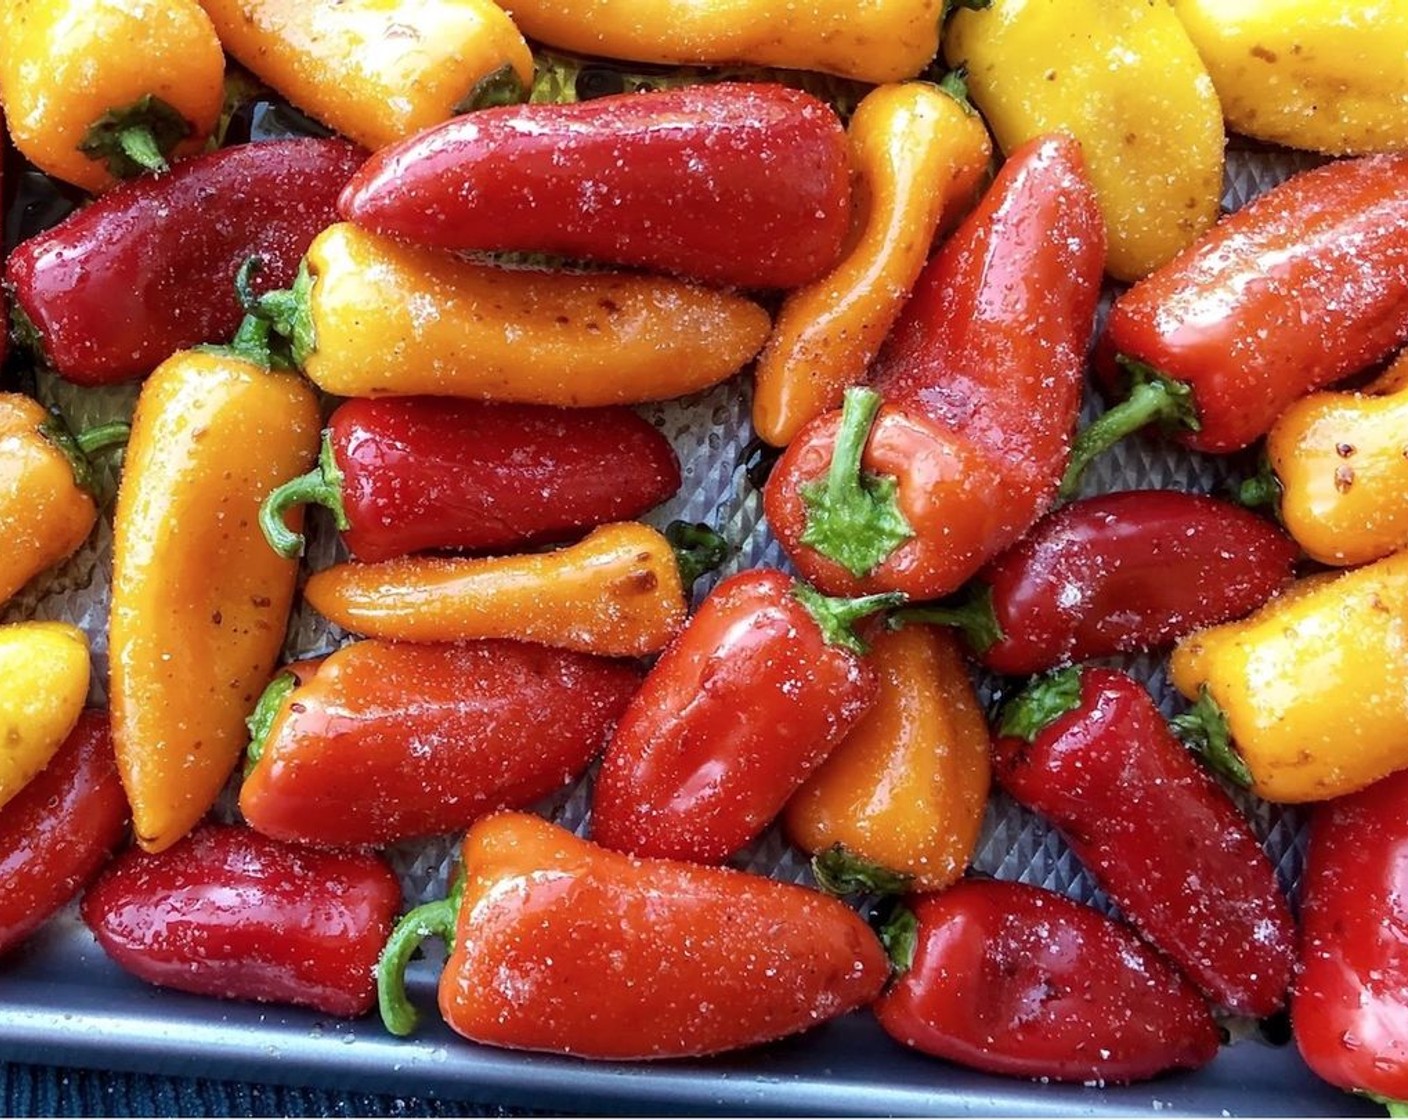 step 2 Place Mini Peppers (4 1/2 cups) in a 9x13-inch pan or baking dish. Coat the peppers with the Extra-Virgin Olive Oil (1/4 cup) and Balsamic Vinegar (3 Tbsp). Season with the Kosher Salt (1 tsp) and toss to coat.